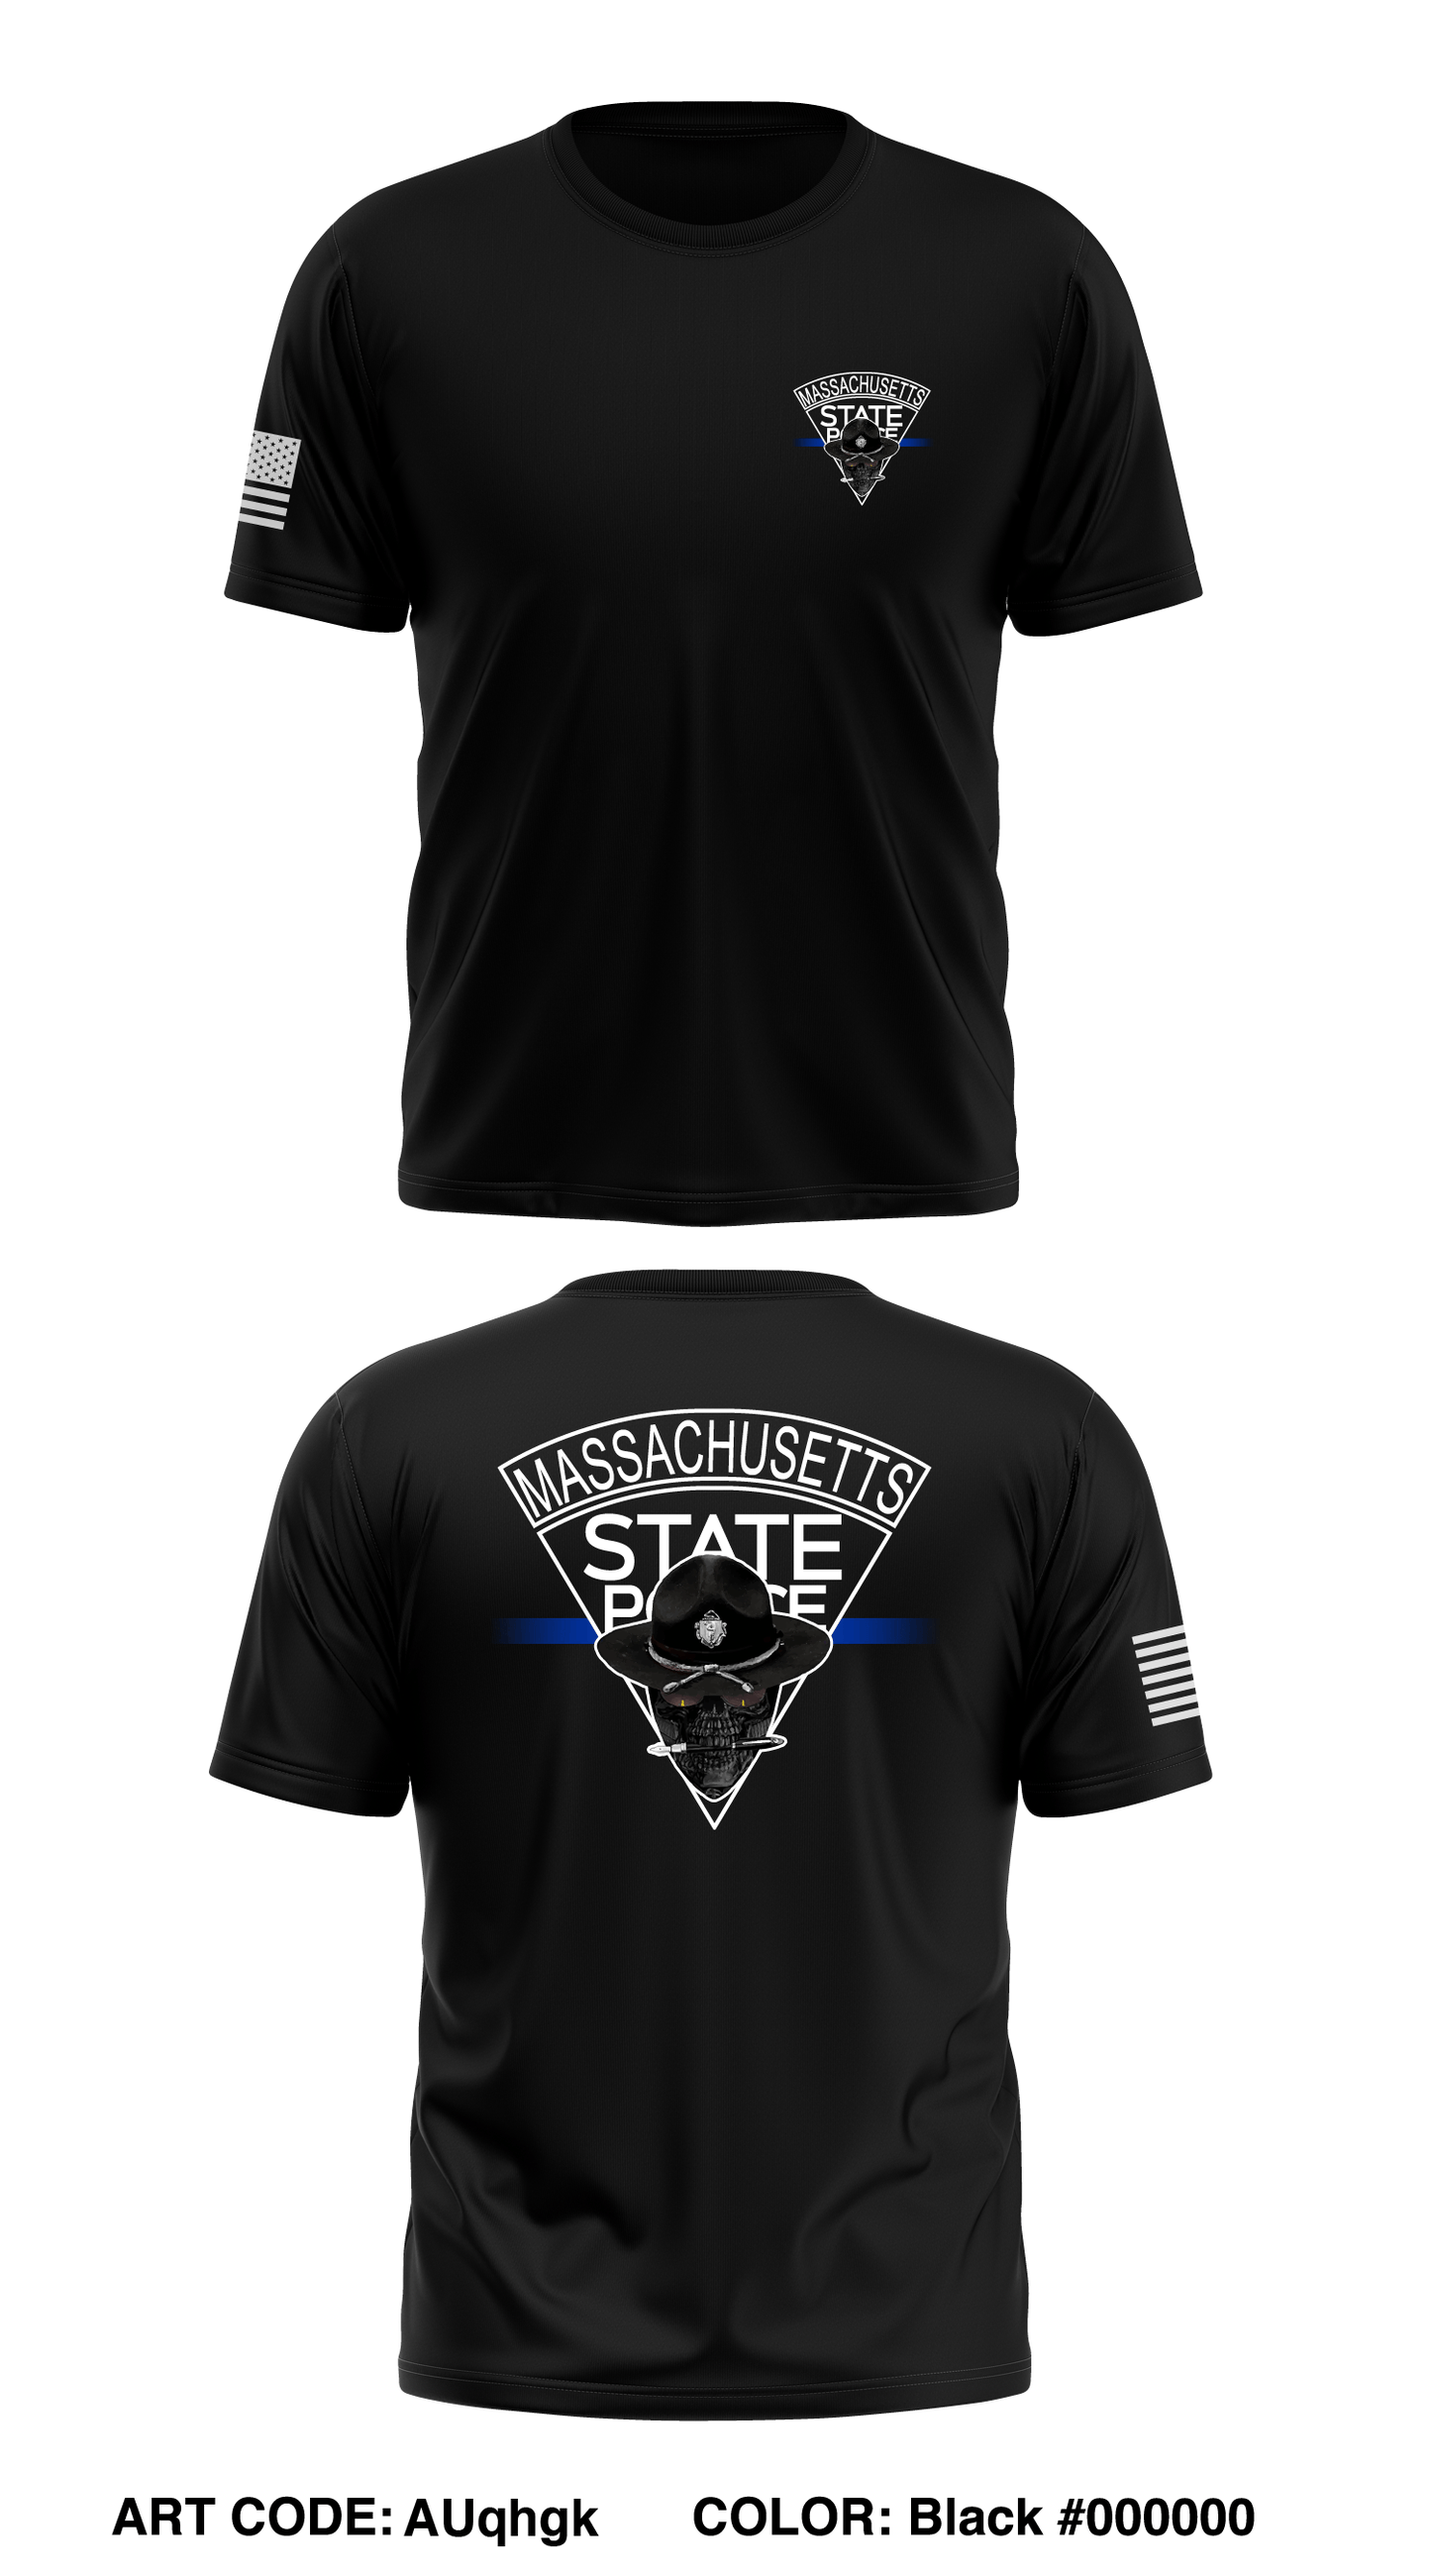 MSP STATE POLICE Store 1 Core Men's SS Performance Tee - AUqhgk